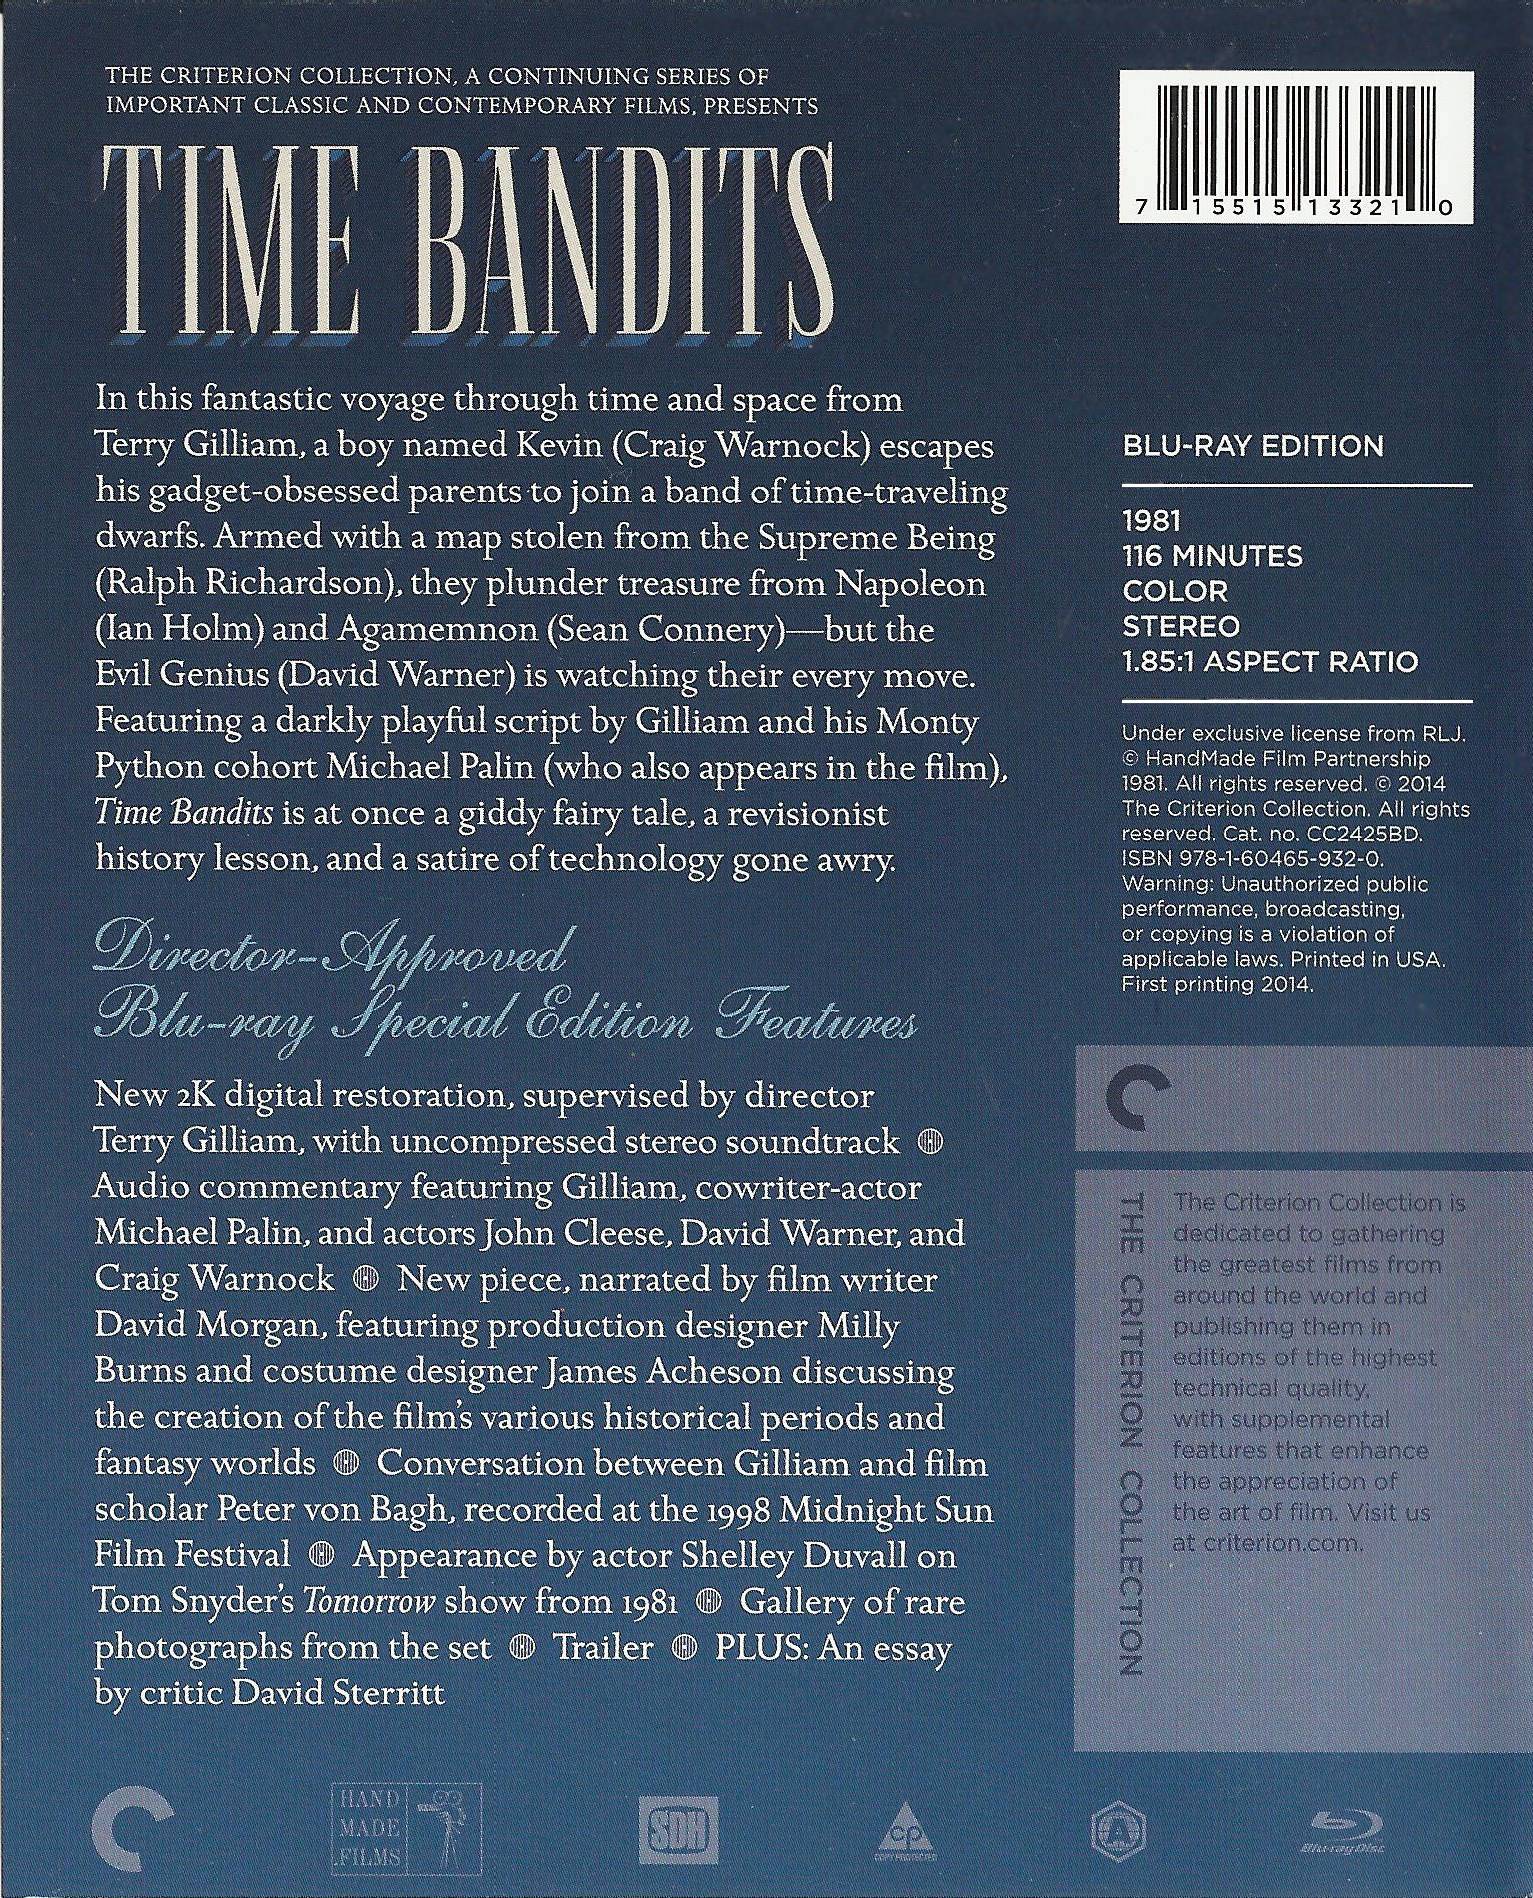 Blu-ray Review: Time Bandits (Criterion)